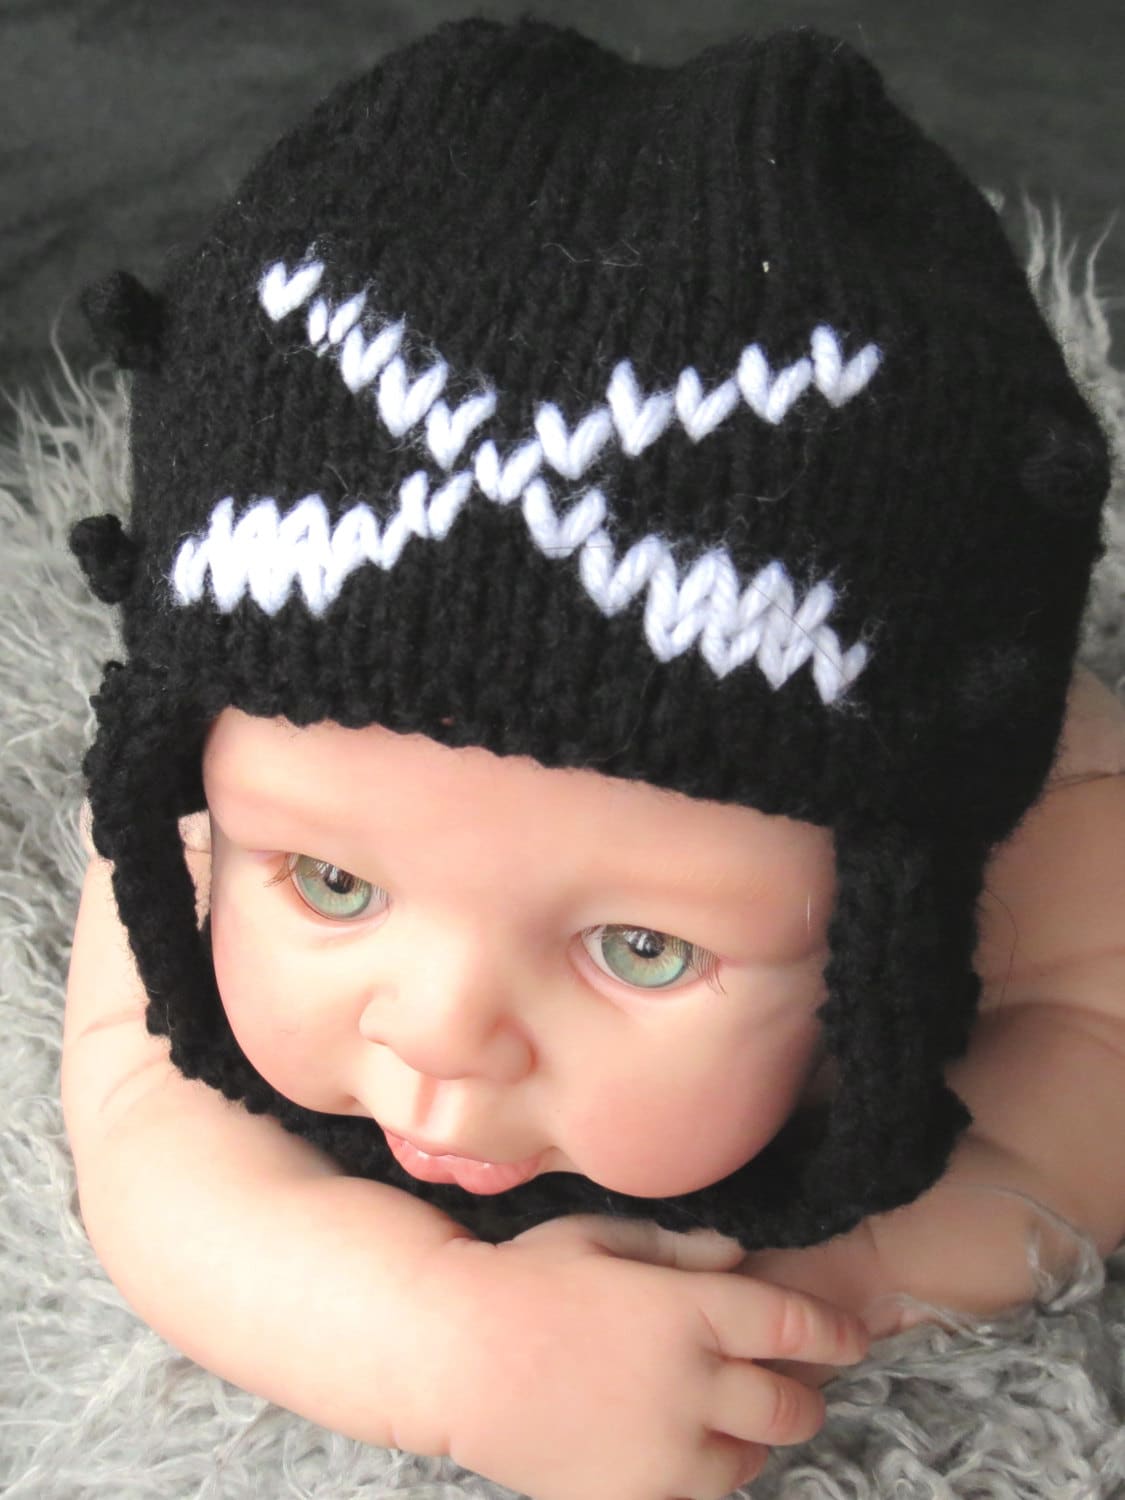 Crochet Hat Pattern Ebook Includes Sizes Newborn Adult Easy Step by Step  Photo Tutorials Baby Toddler Child Teen Adult S, M, L, XL 